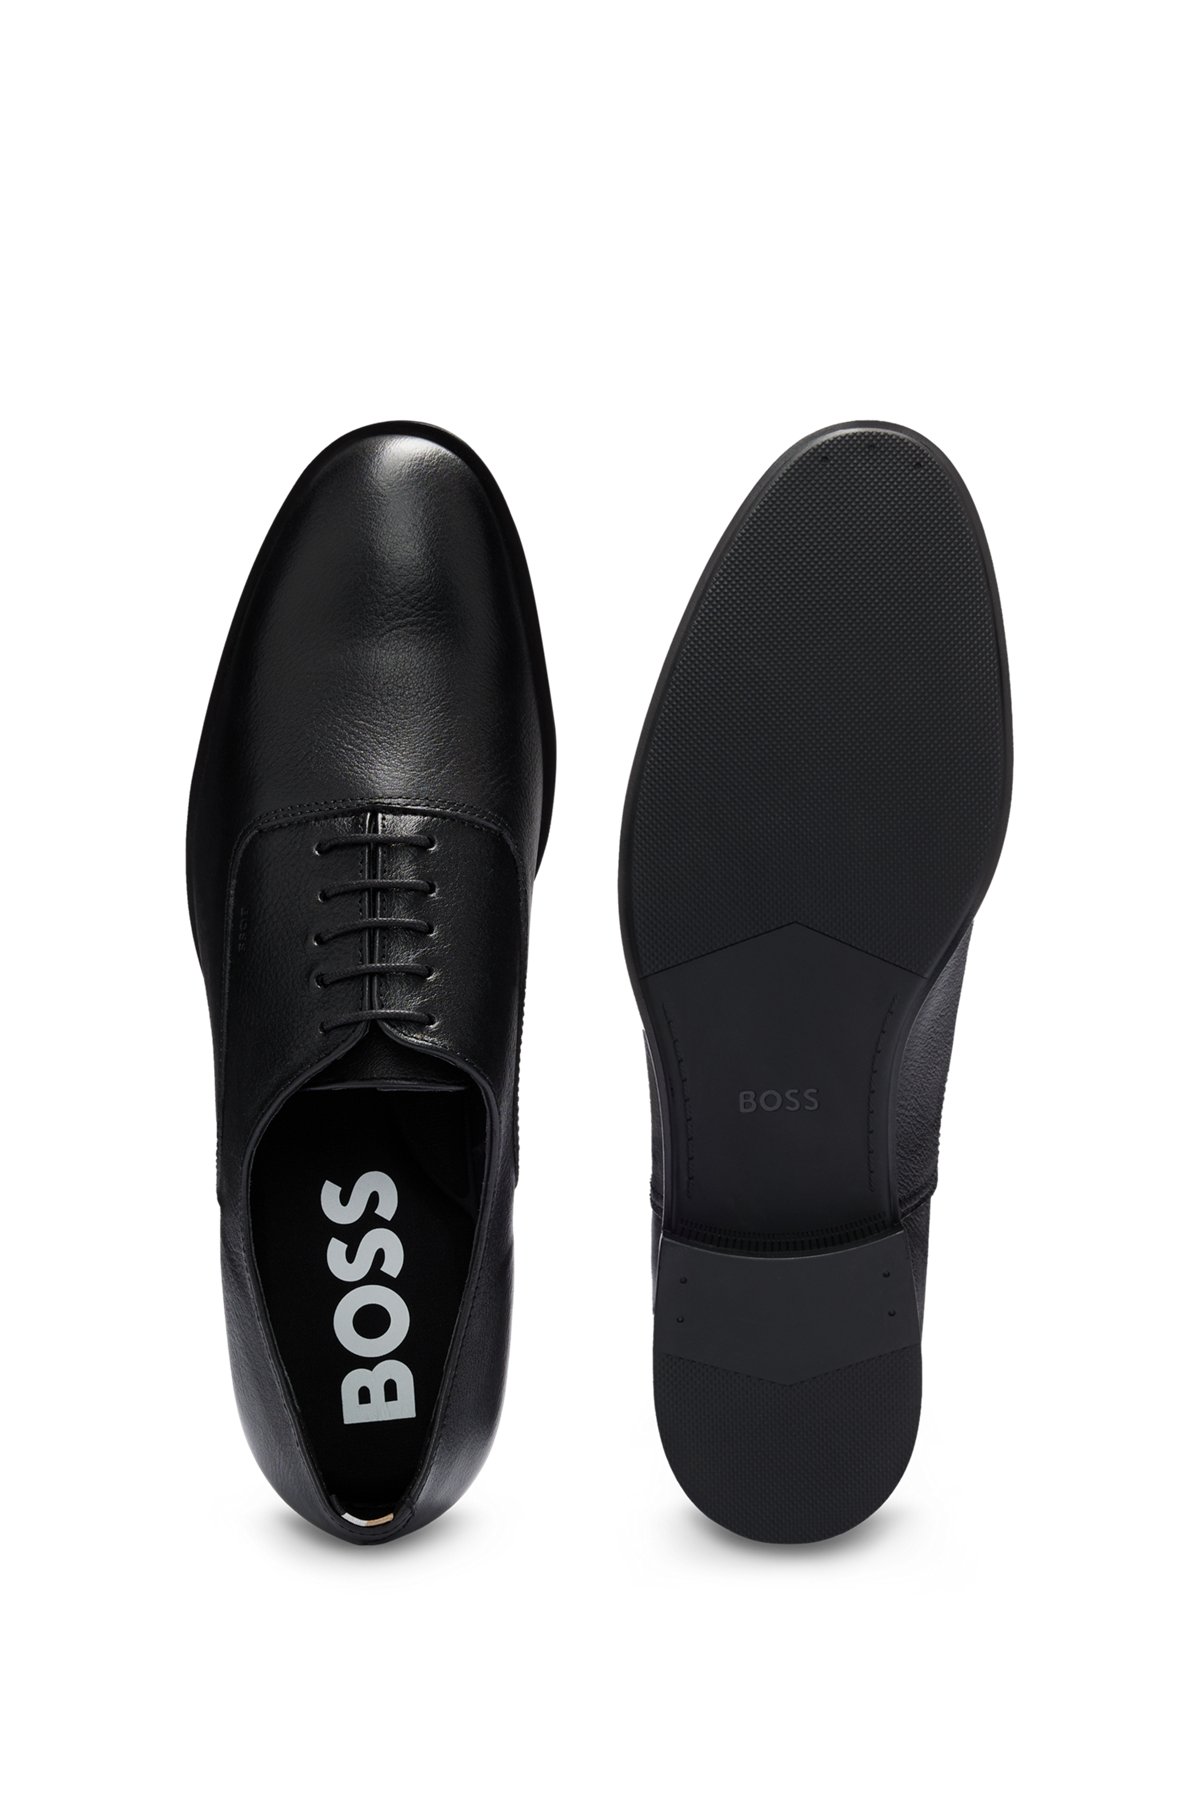 Grained-leather Oxford shoes with embossed logo, Black